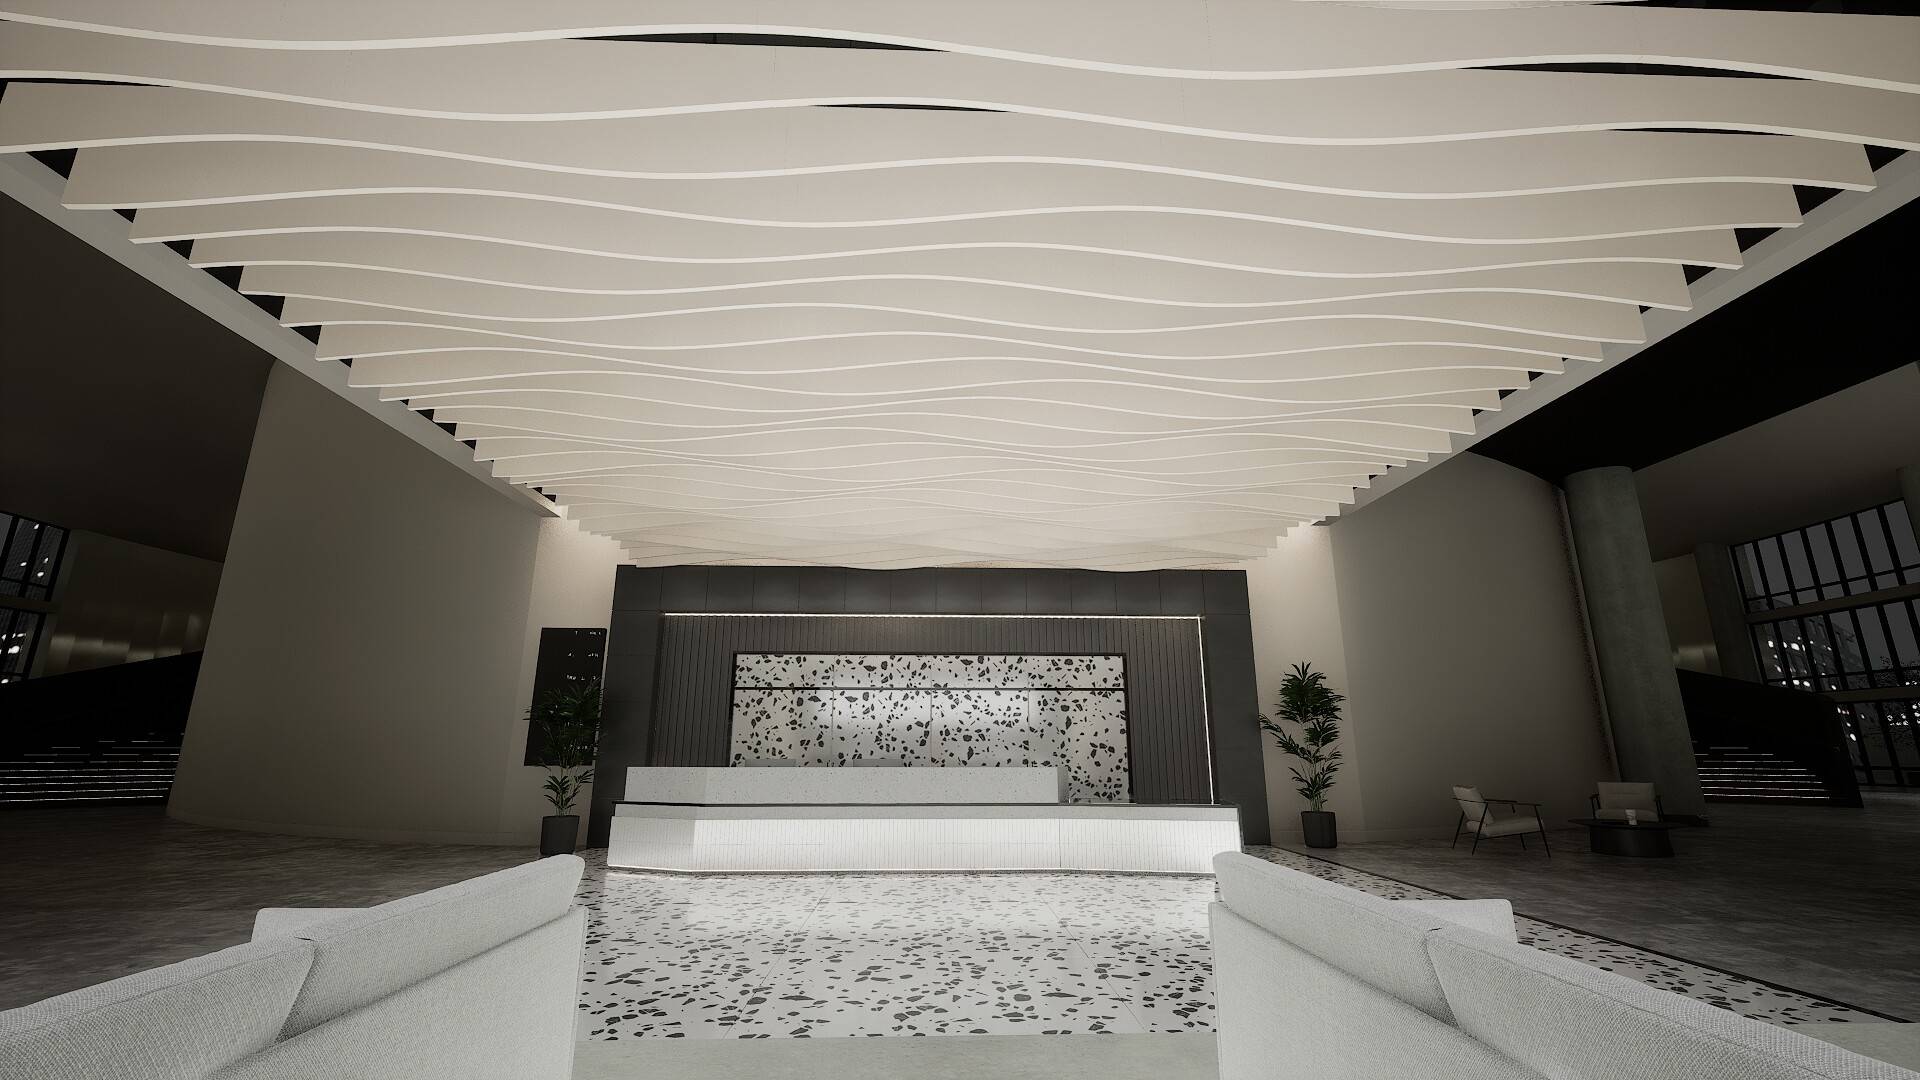 Sonify By Zentia – Sonify Baffle Shapes, Curve - Ceiling System